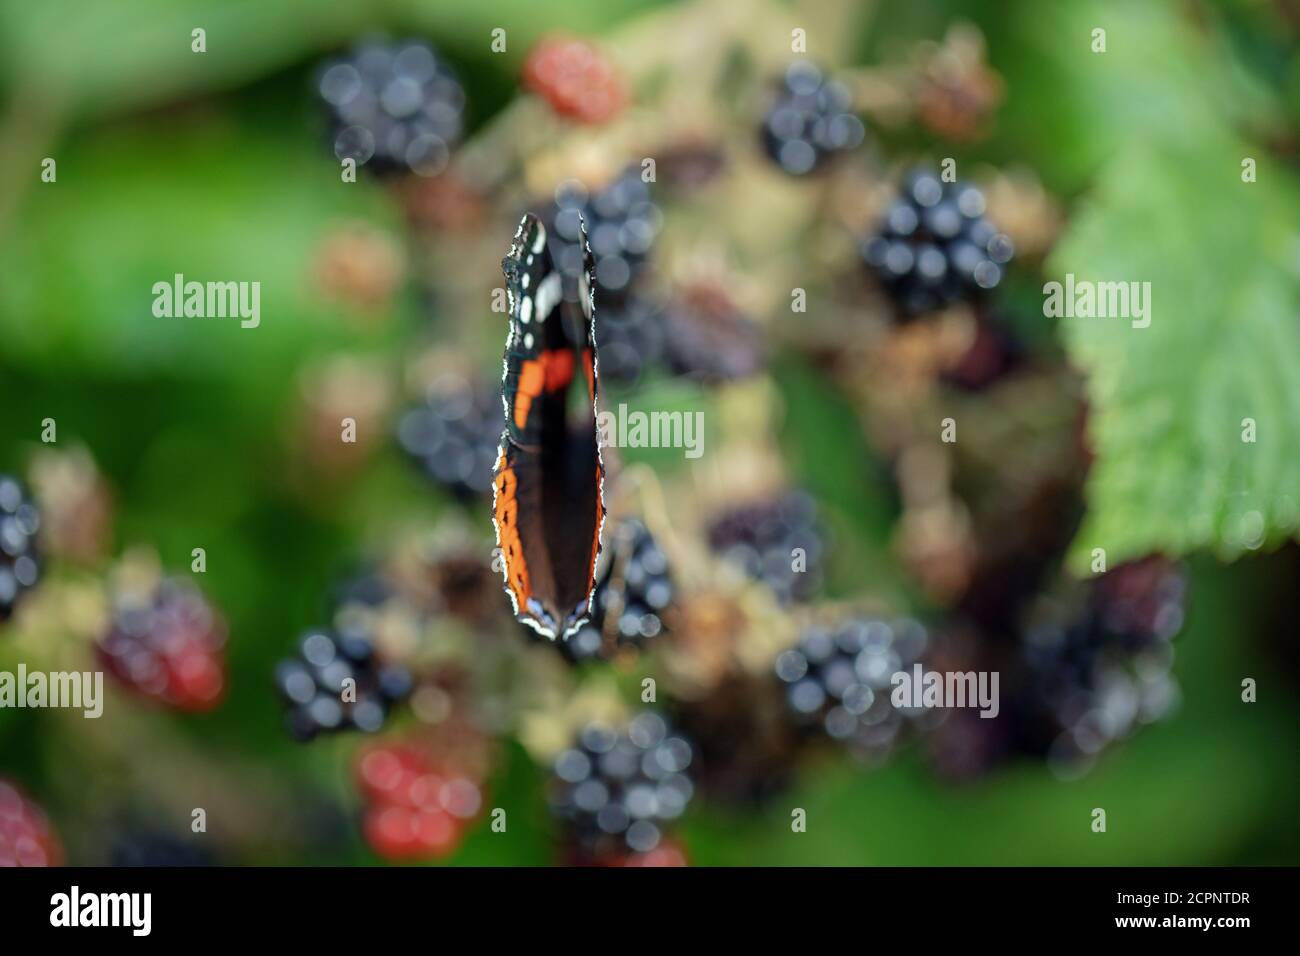 Red Admiral Butterfly (Vanessa atalanta). Feeding from the out of focus, over ripe , Blackberries (Rubus fruticosus), with wings partially open. Stock Photo